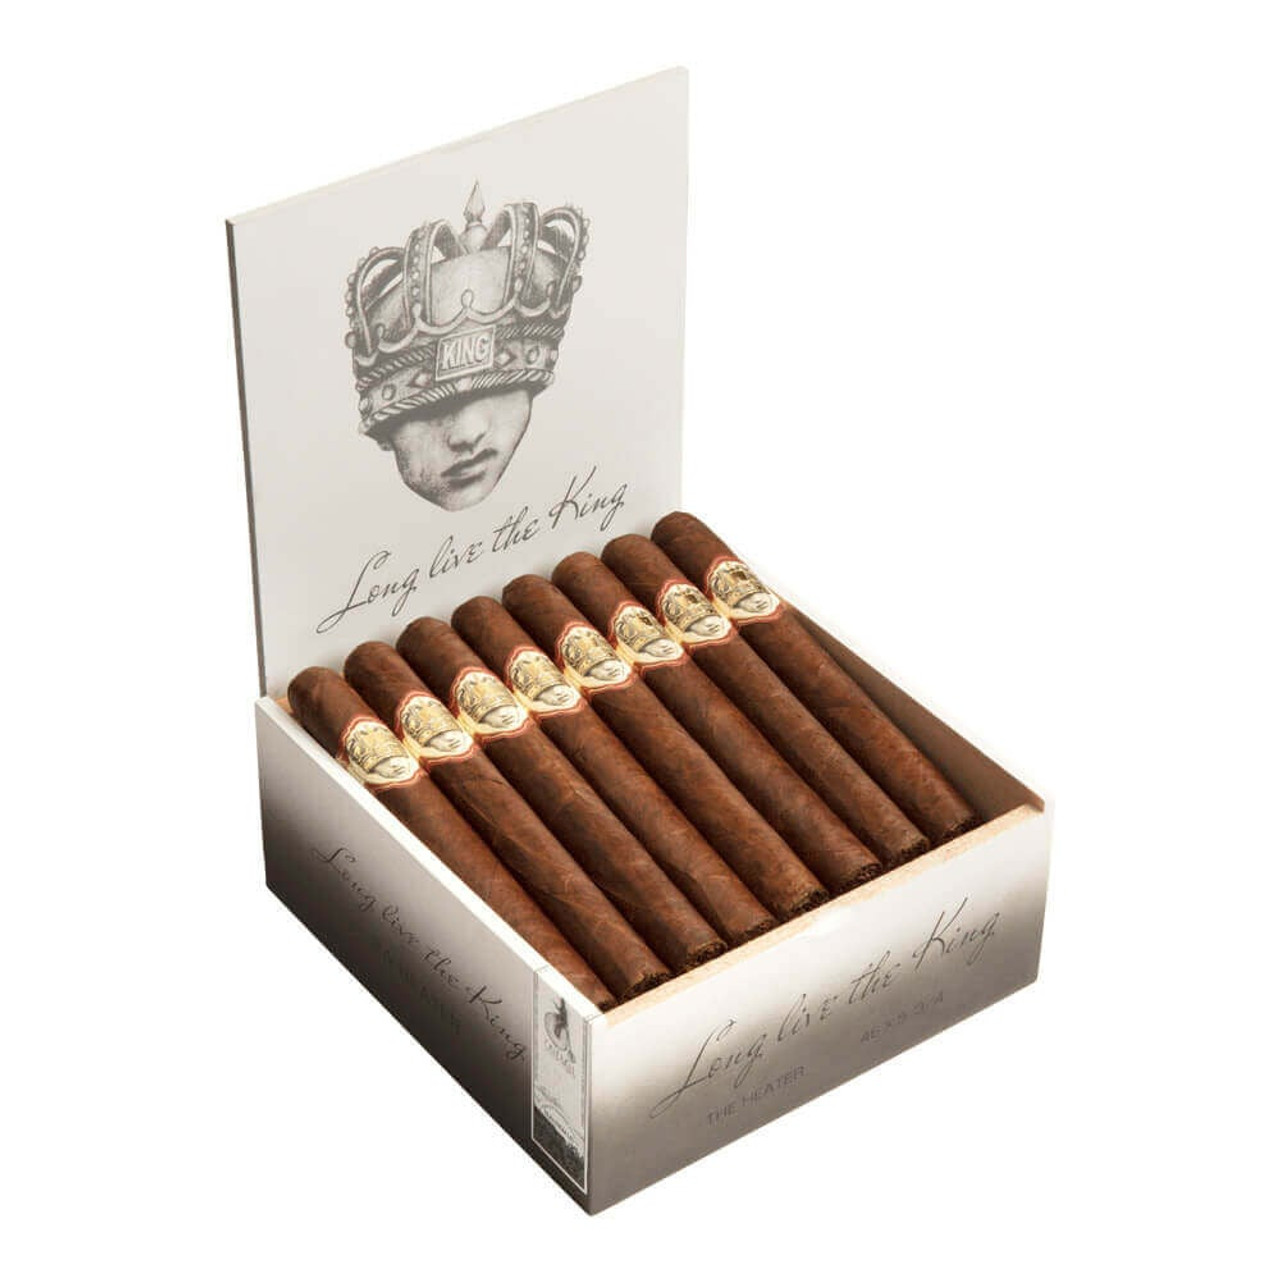 Caldwell Long Live The King The Heater Cigars - 5.75 x 46 (Box of 24) Open